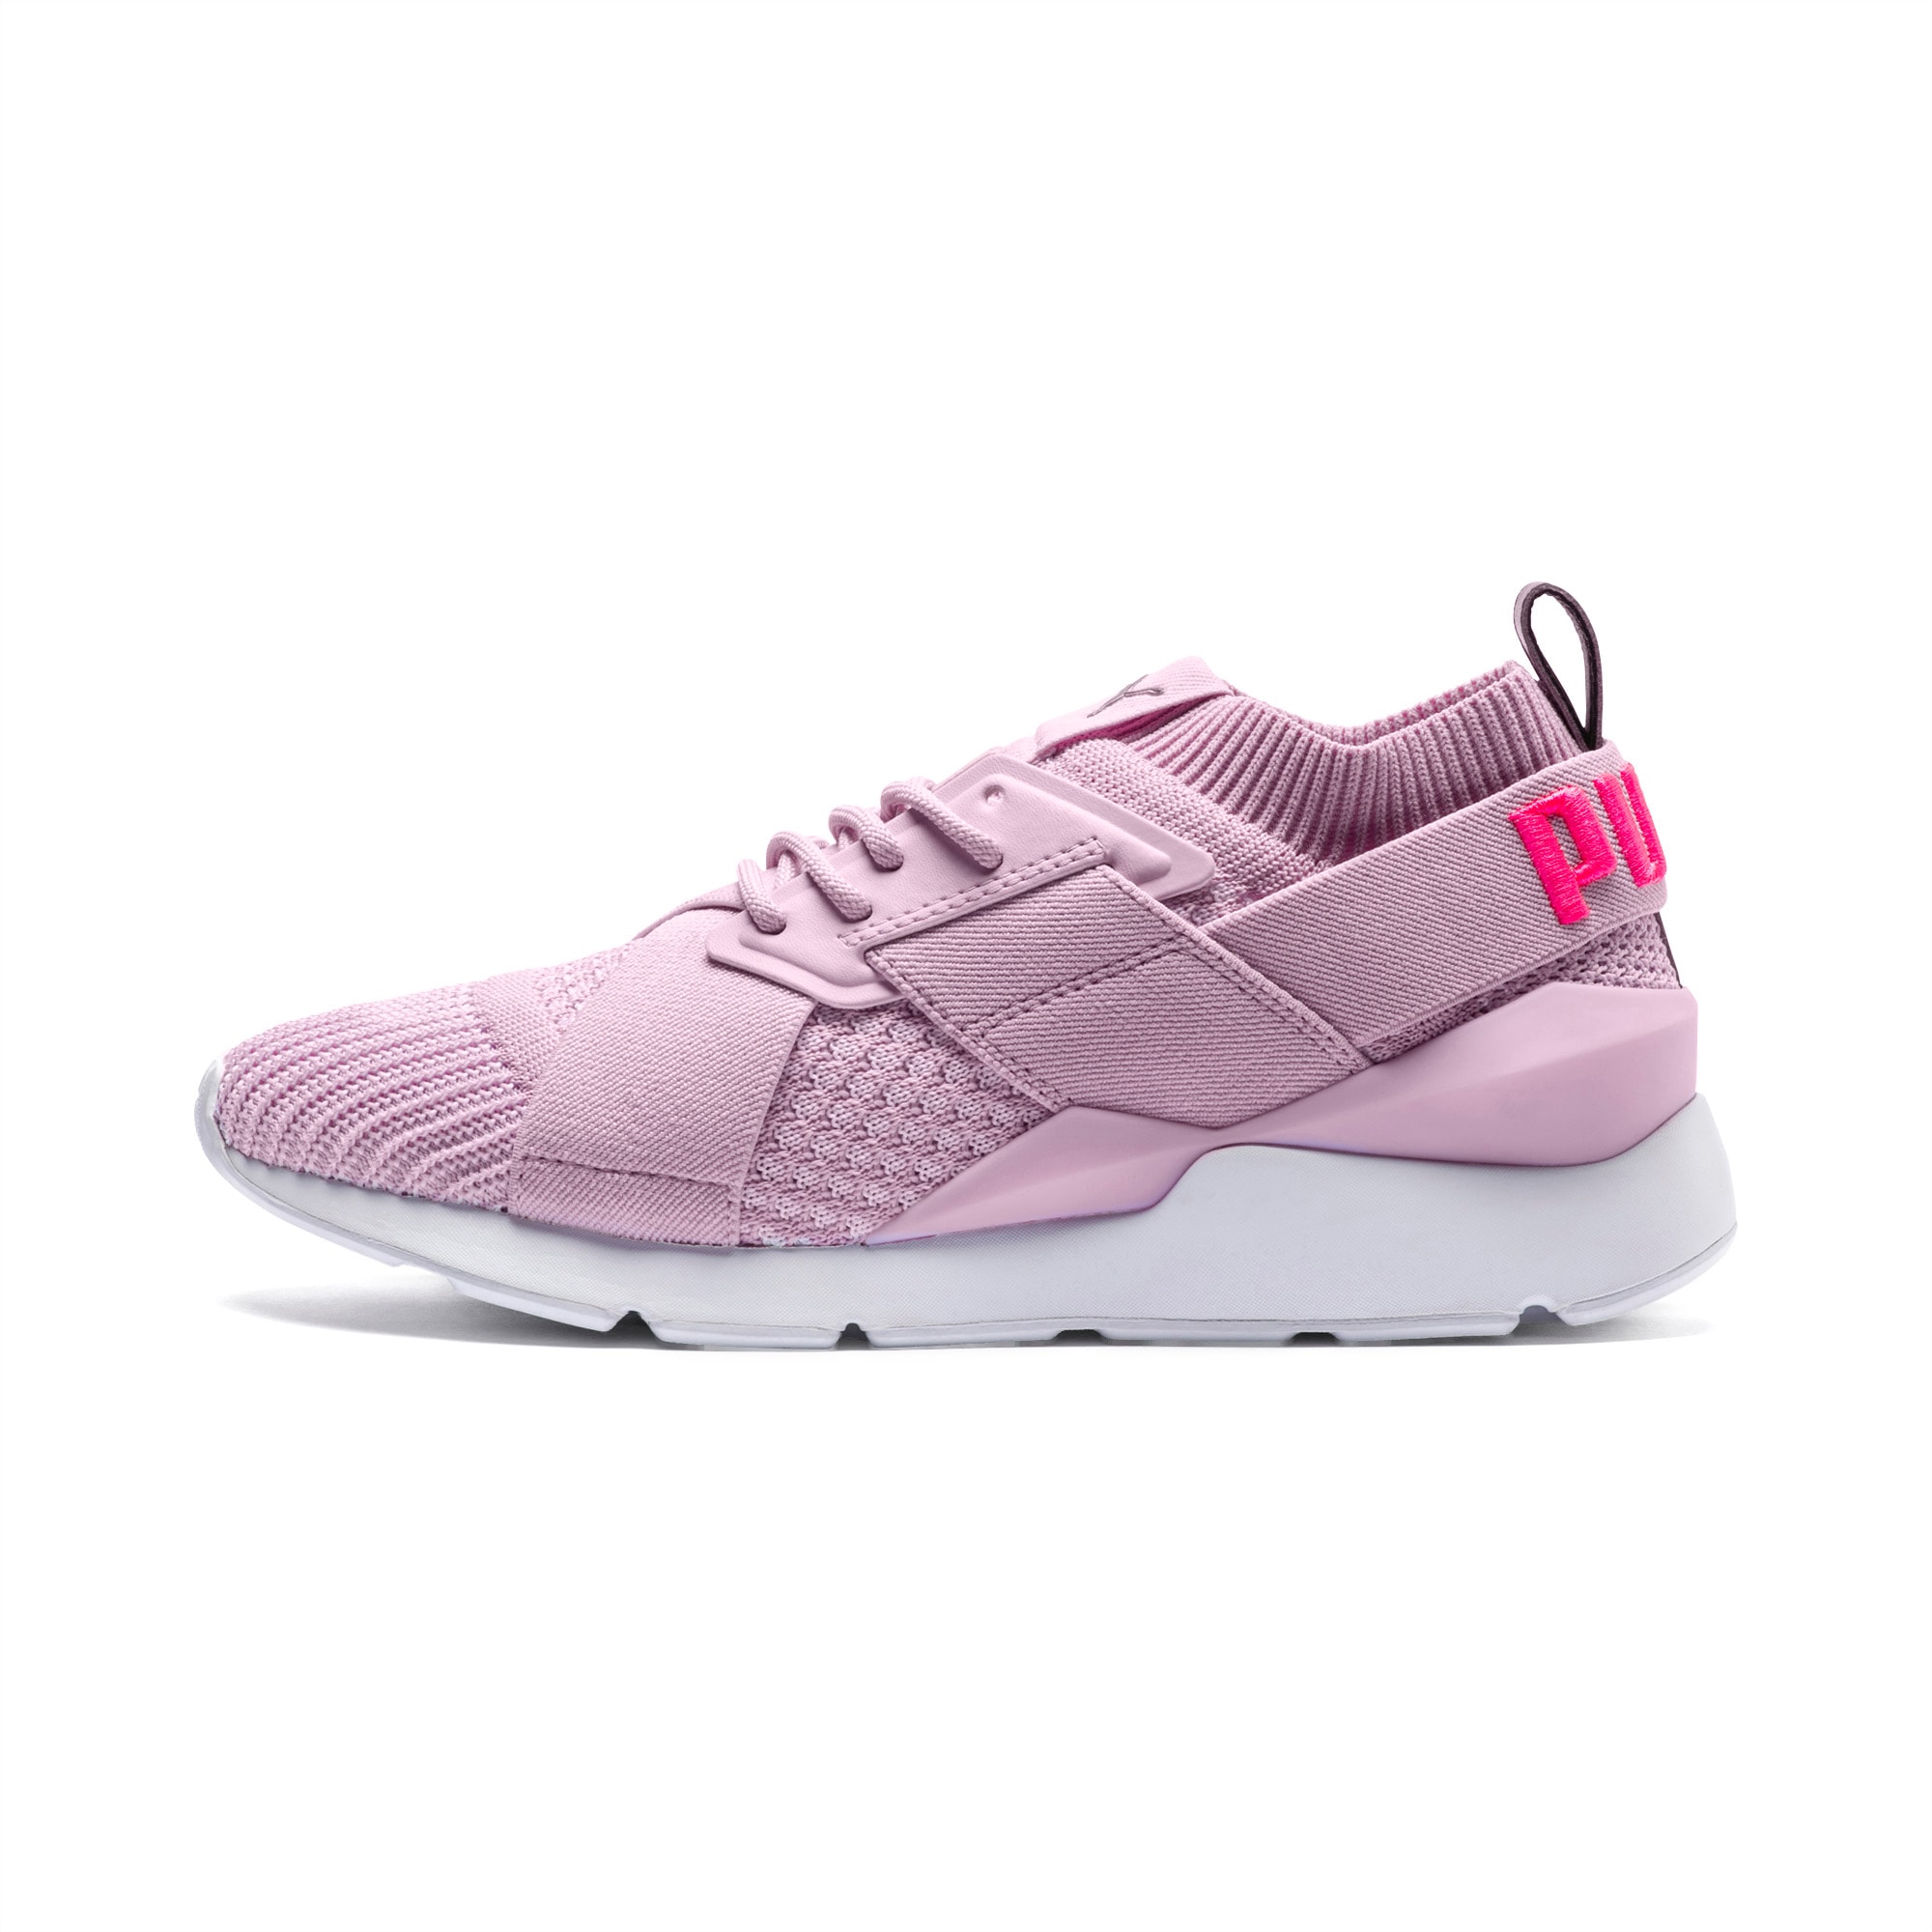 Muse evoKNIT Women's Trainers, Winsome Orchid-Winsome Orchid, large-SEA